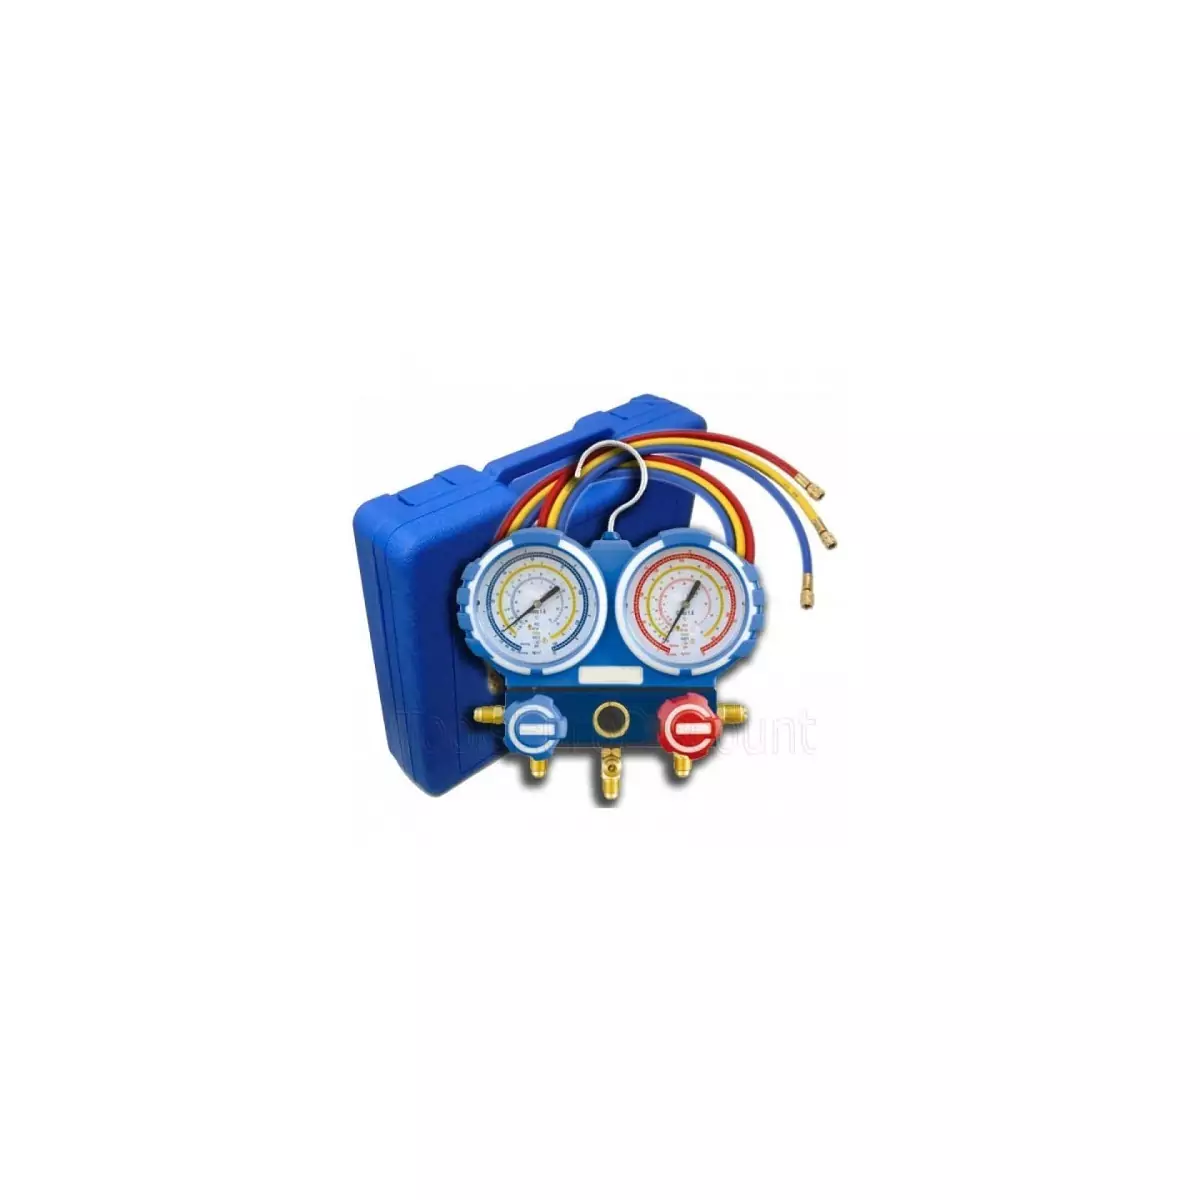 Manifold kit R134a automotive air conditioning